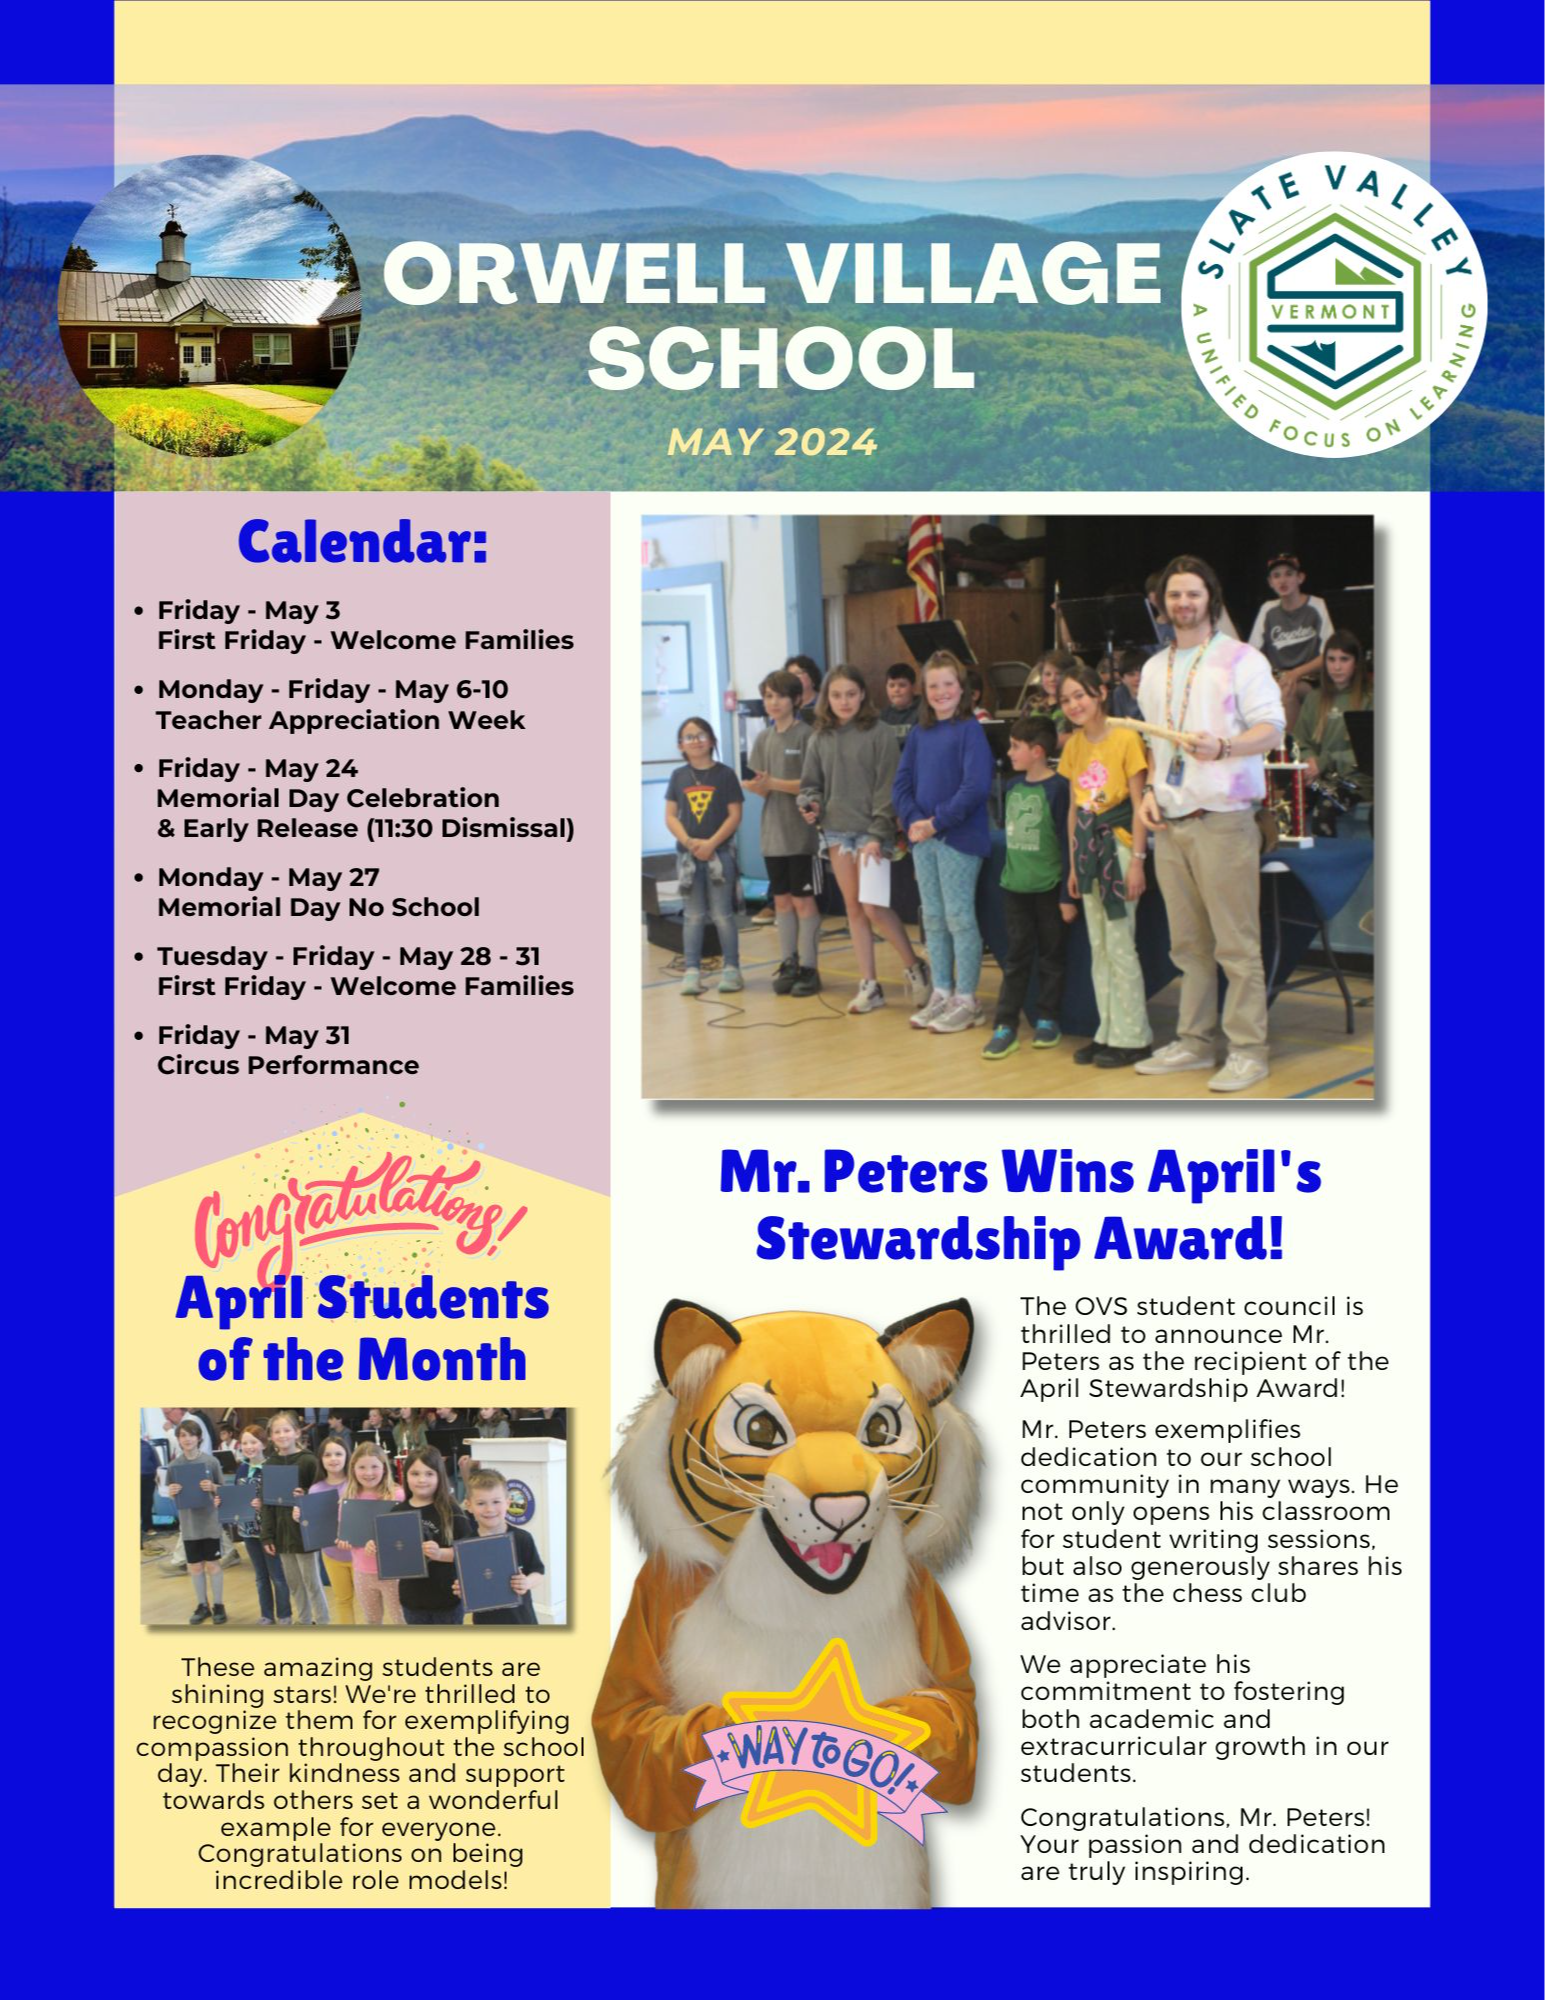 Click the image to see the full PDF Newsletter